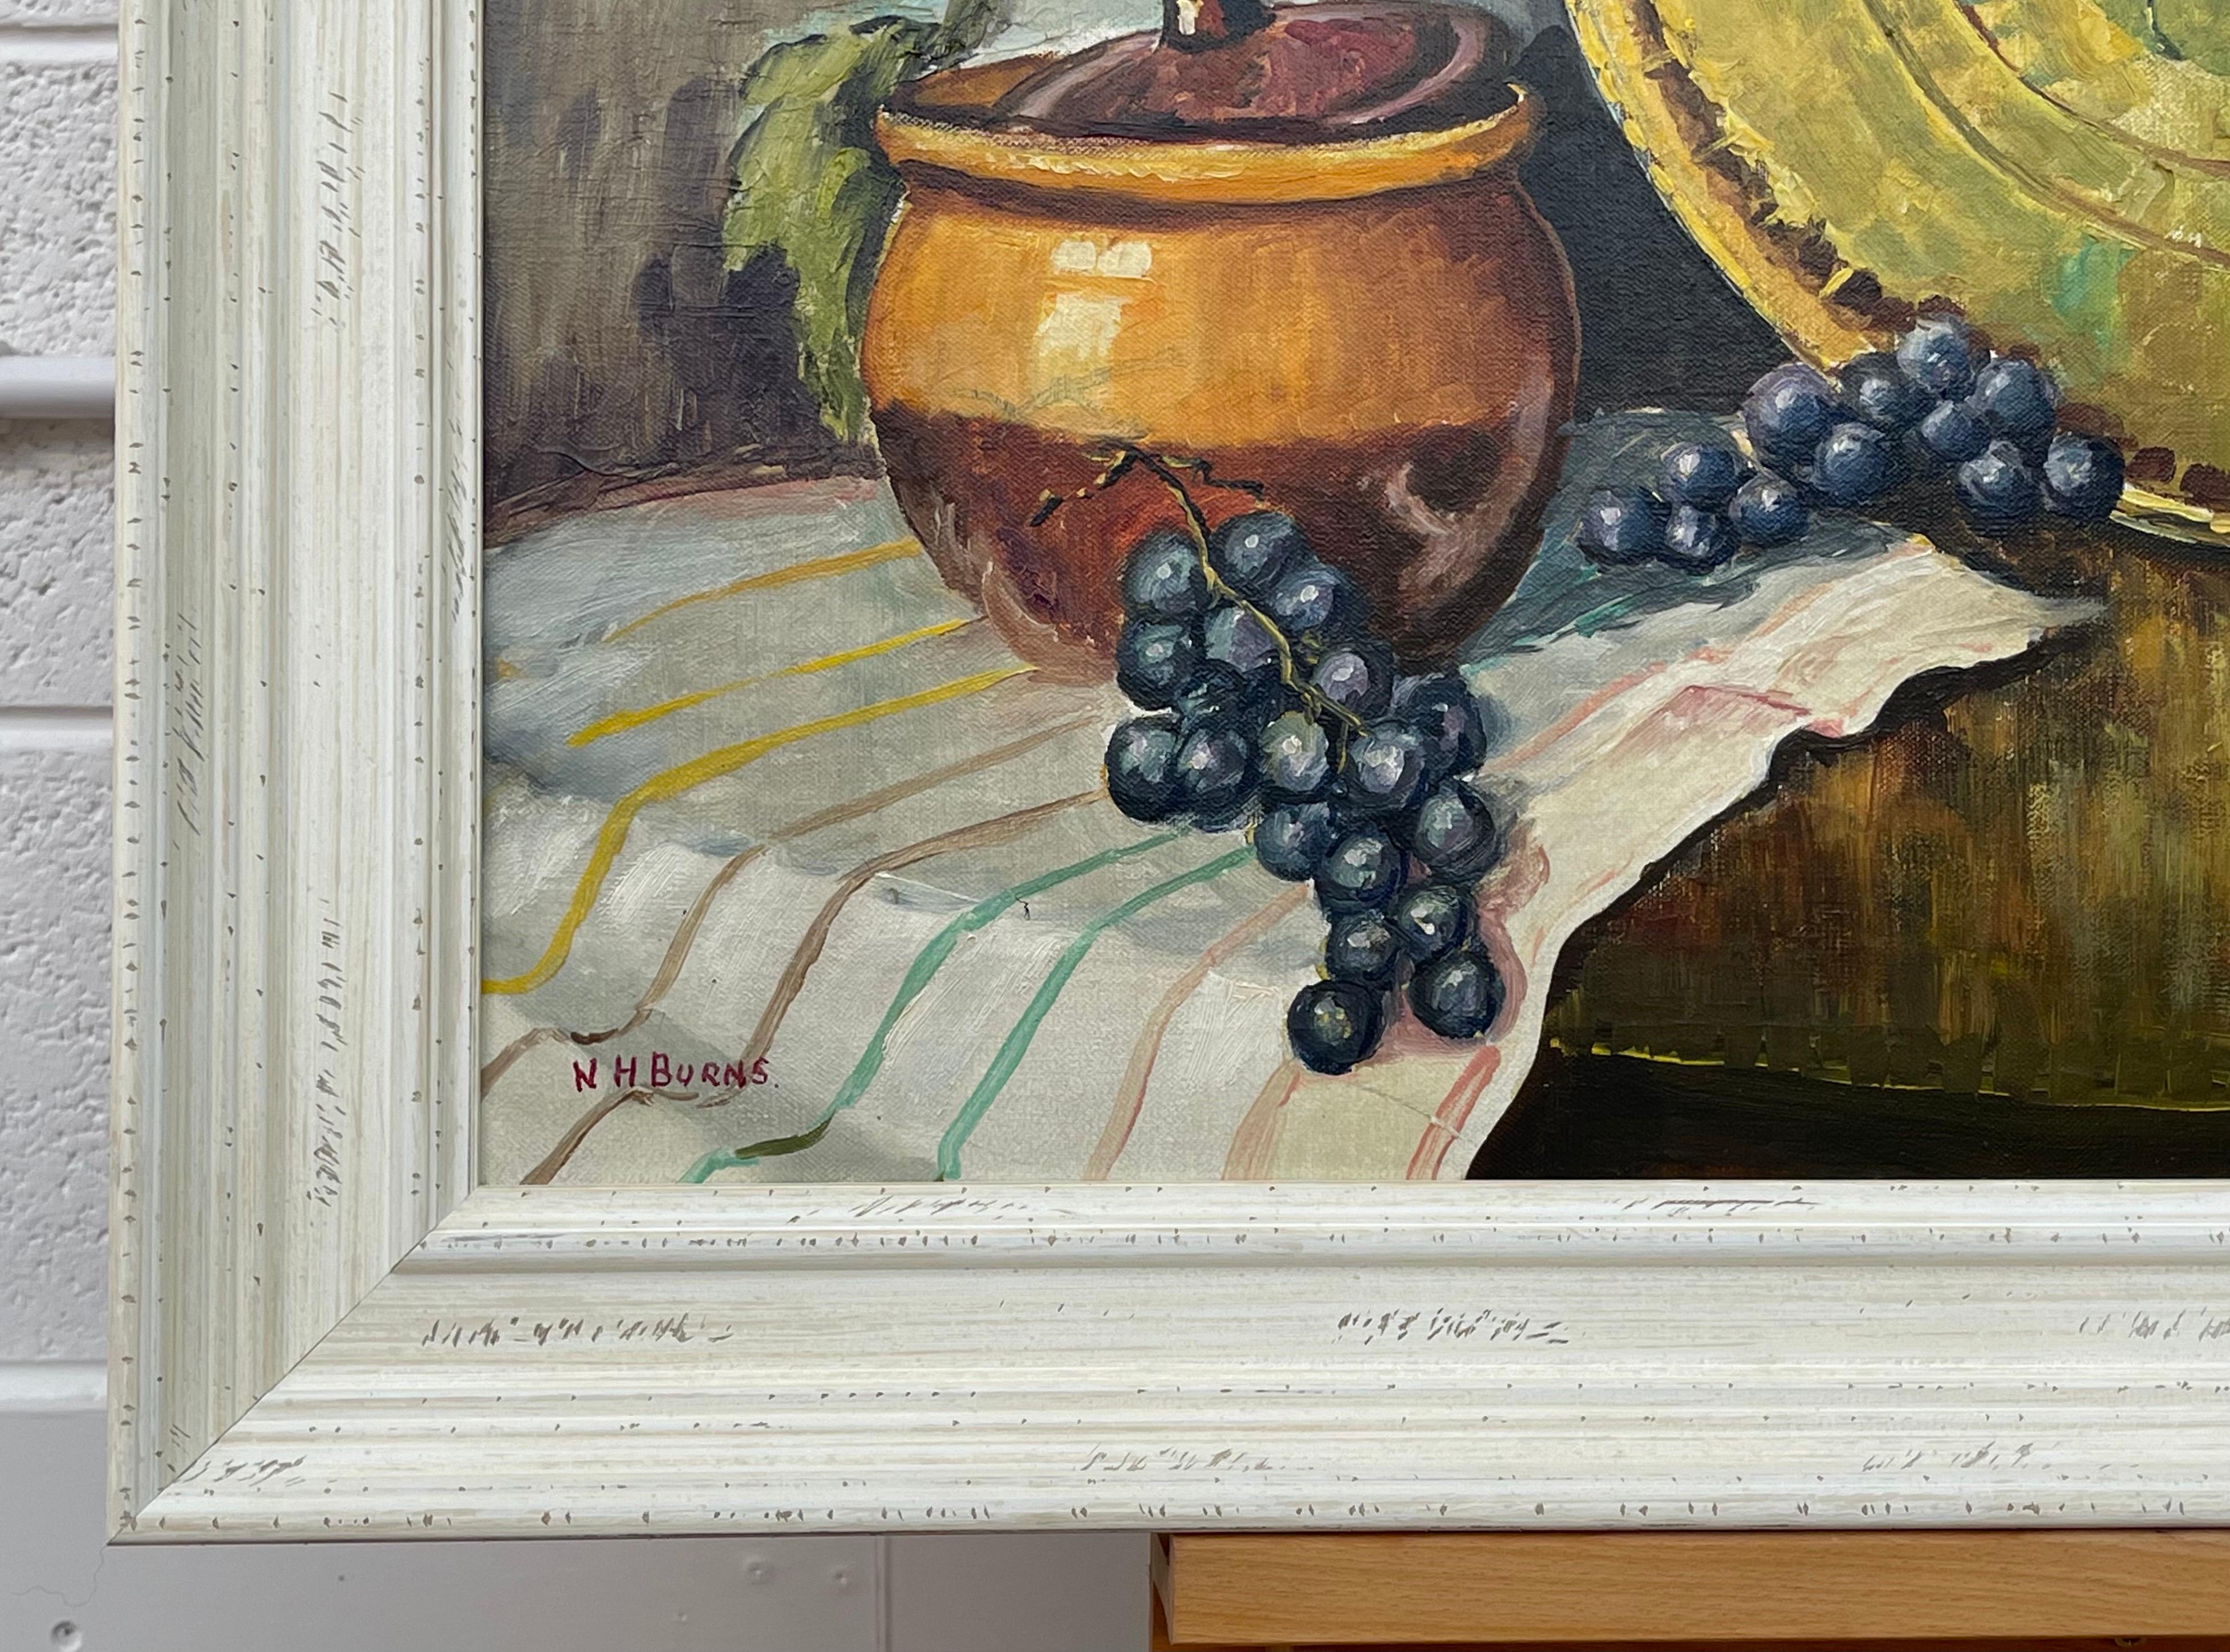 Champagne Bottle with Grapes & Pot Still Life Interior Original Oil Painting by 20th Century Artist Artist William Henry Burns (1924-1995). Framed in a high quality off-white shabby chic contemporary wooden moulding. 

Art measures 30 x 24 inches